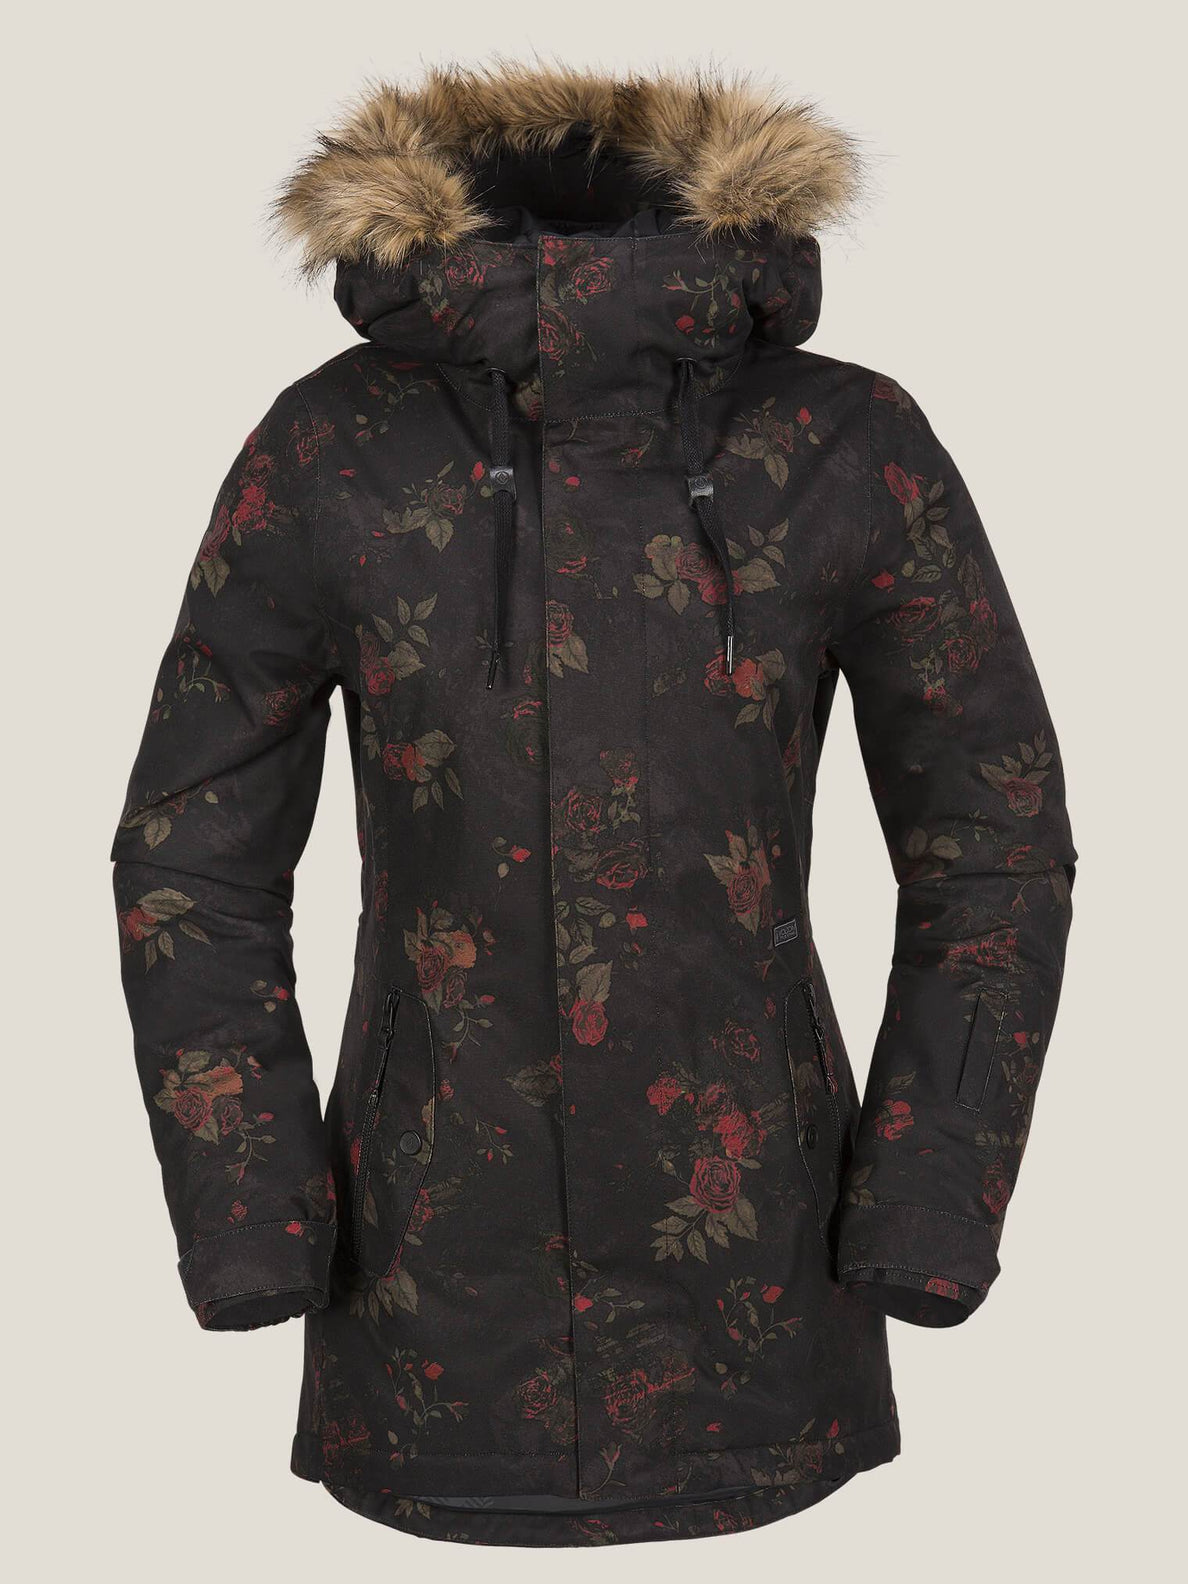 Mission Insulated Jacket - Black Floral Print